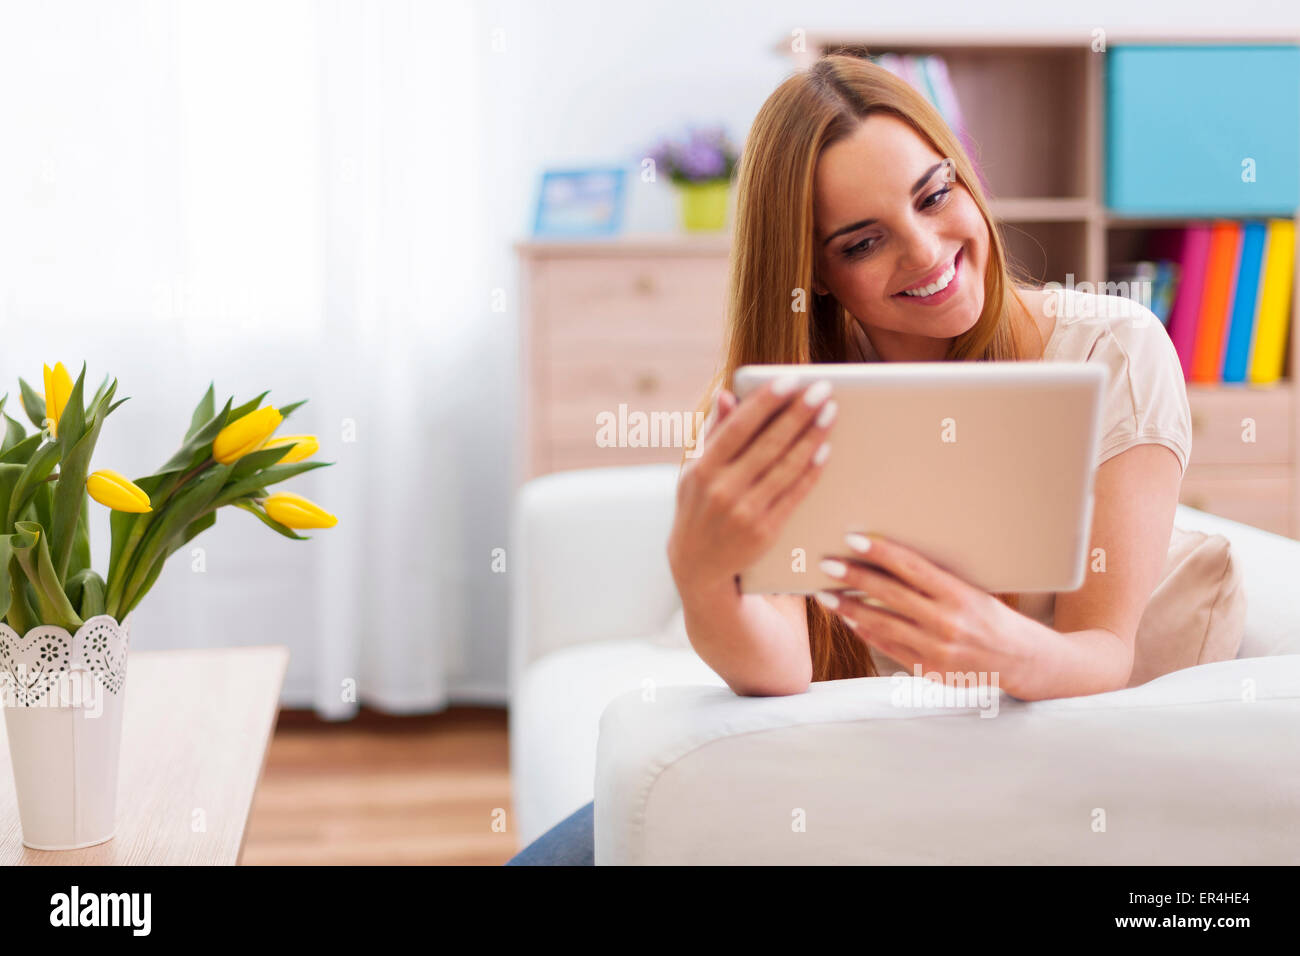 Happy woman with digital tablet at home. Debica, Poland Stock Photo